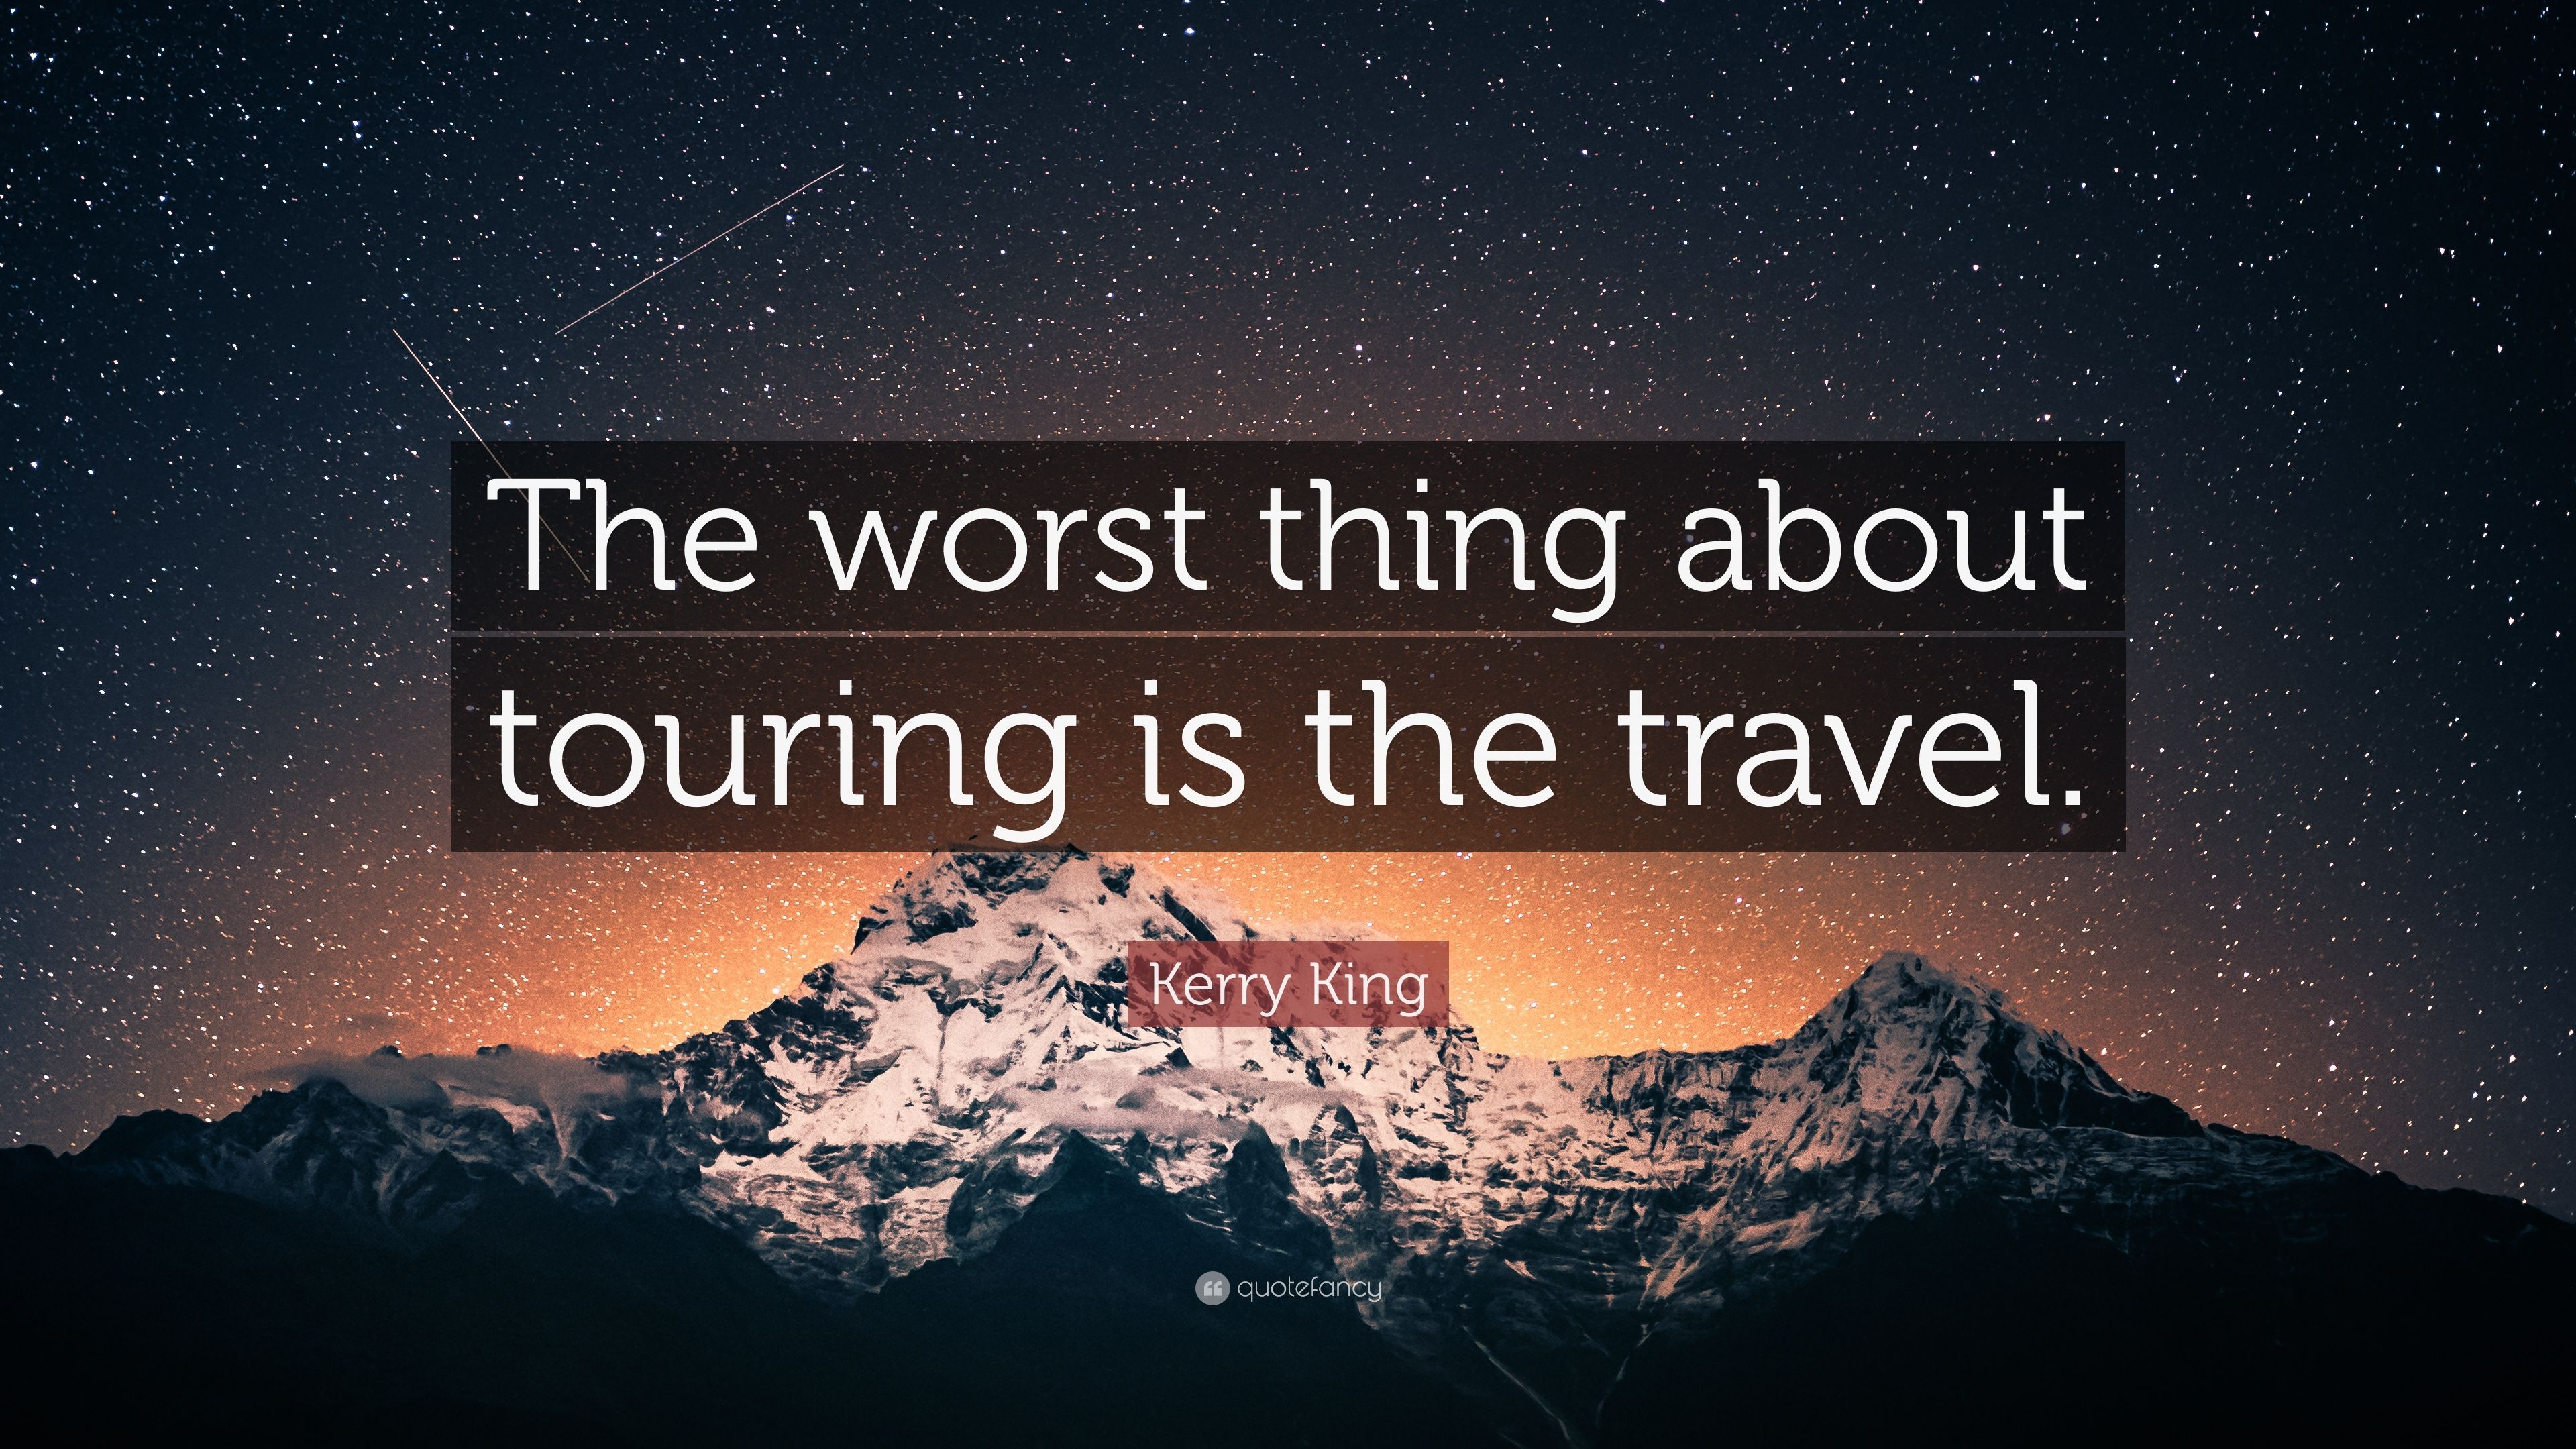 Kerry King Quote: "The worst thing about touring is the travel. 